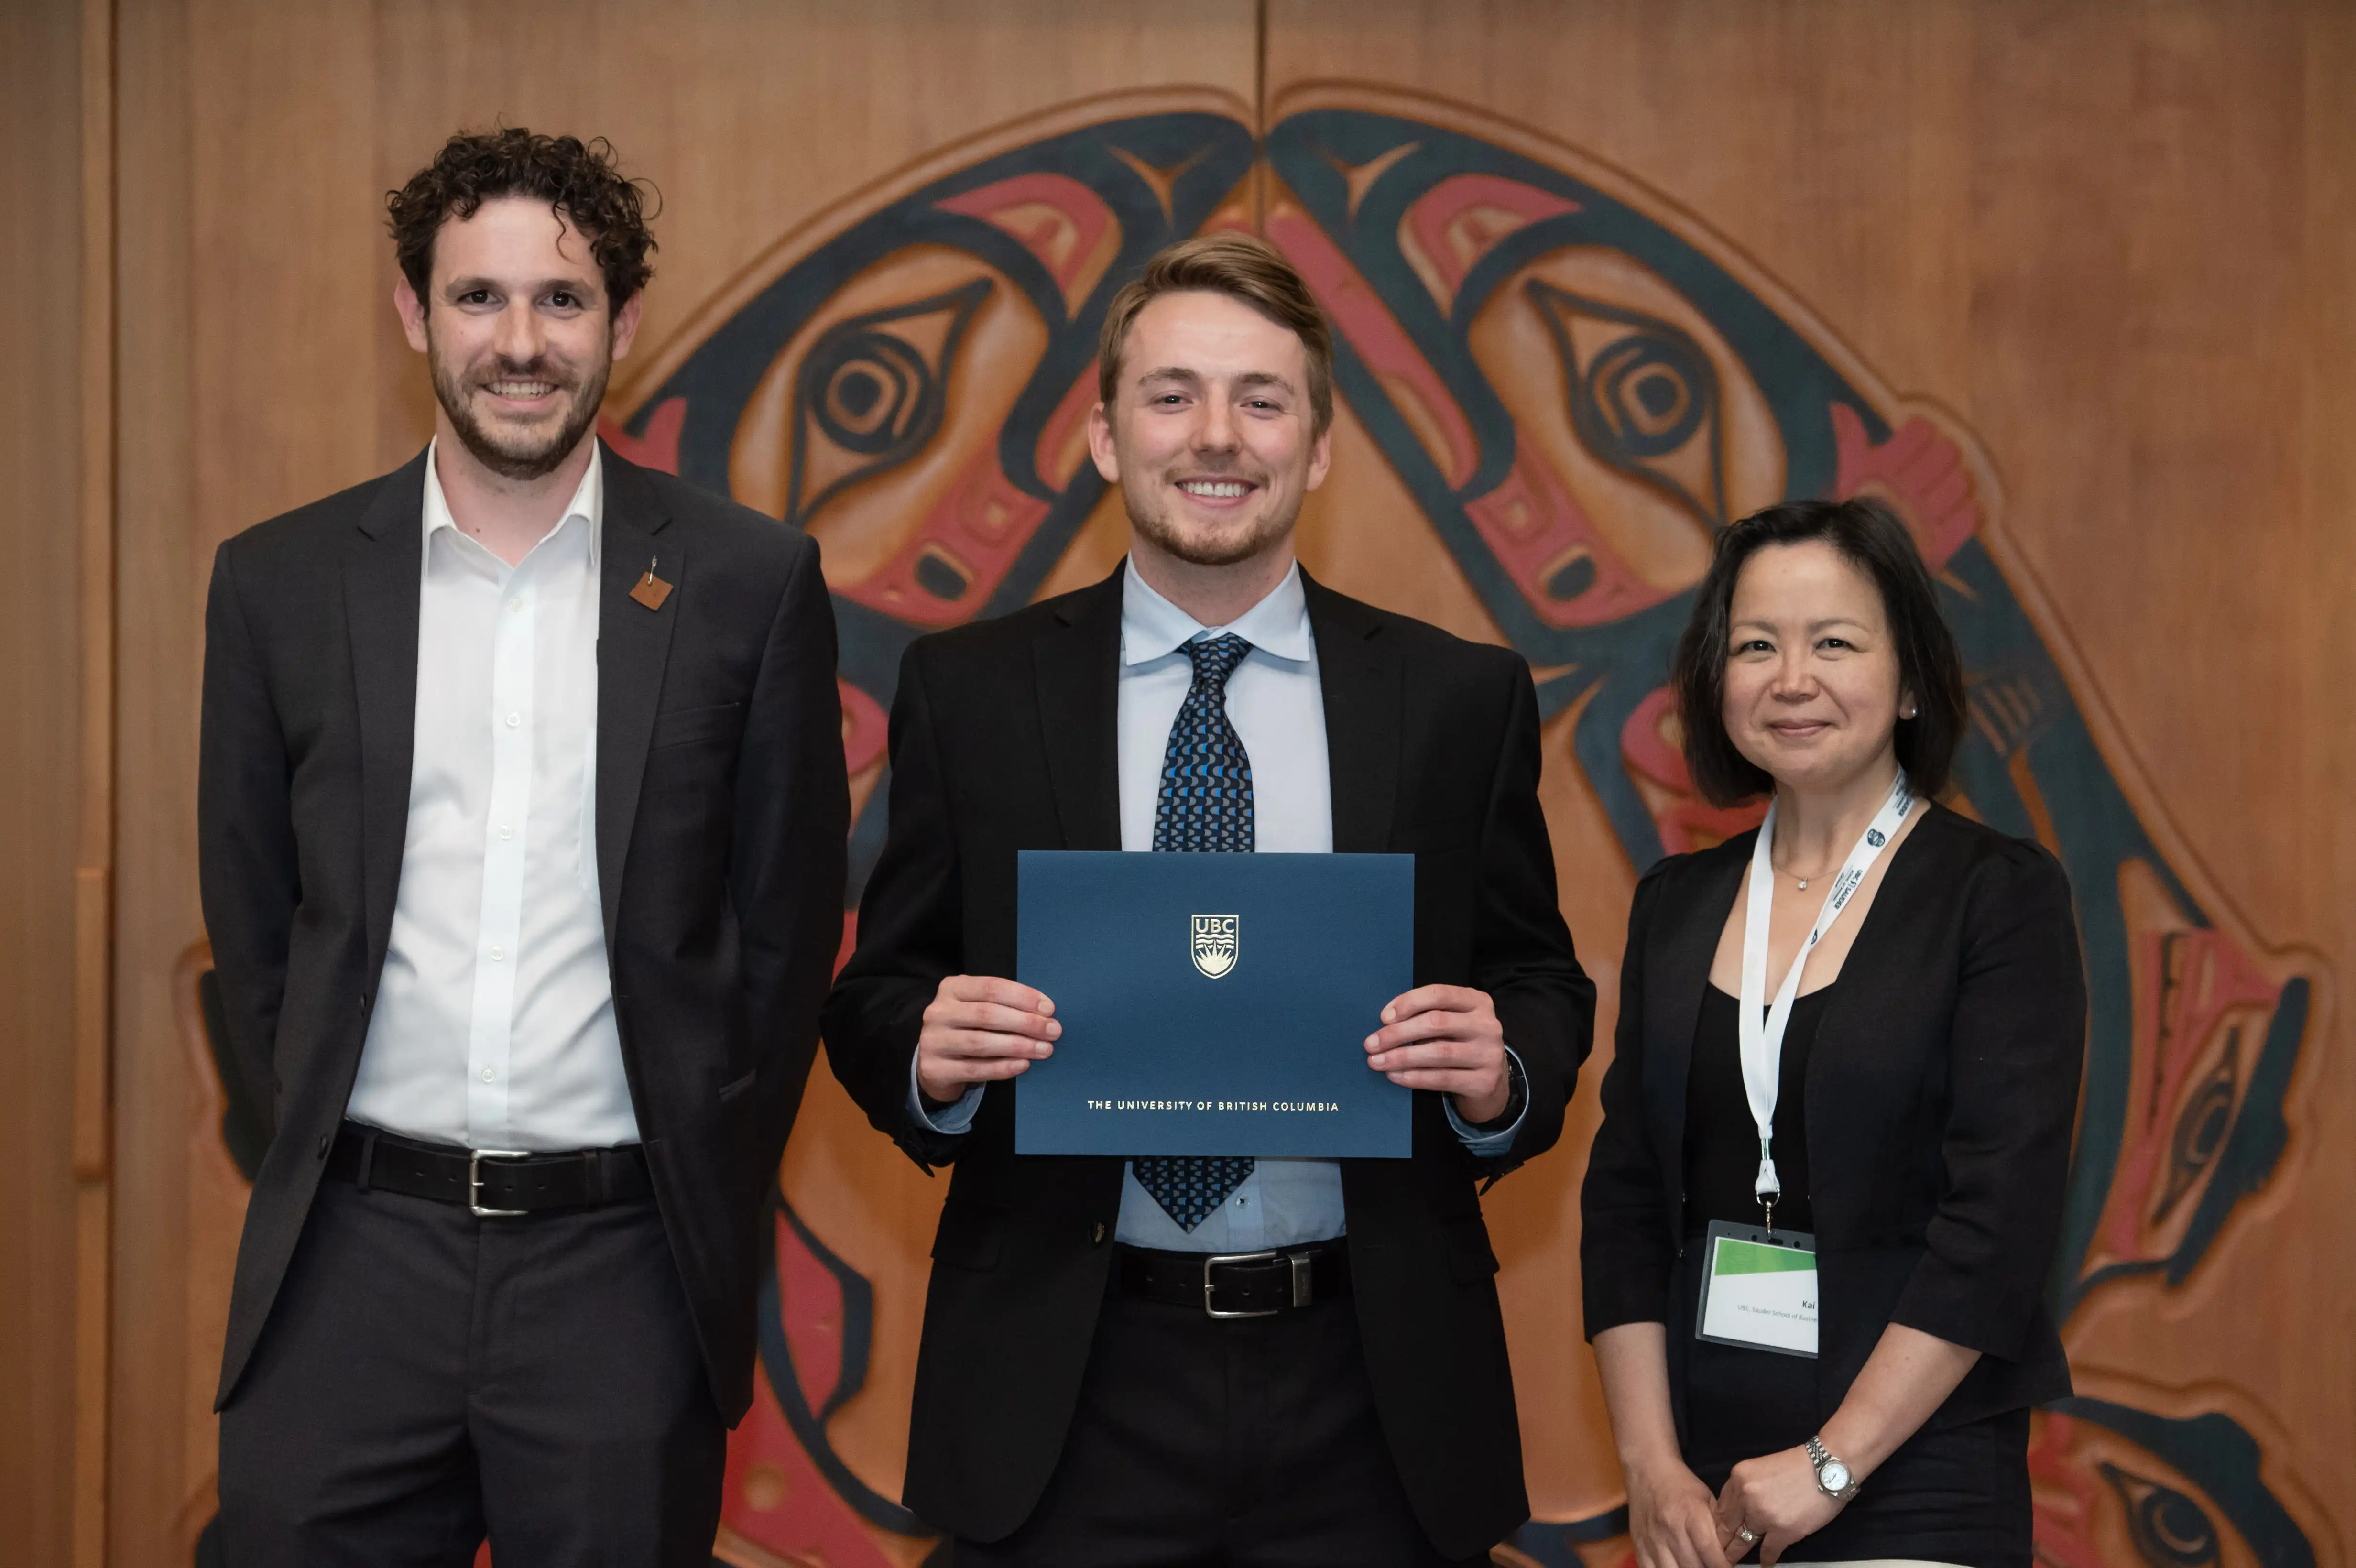 Beavis (centre) is all smiles at his Ch’nook Scholars graduation with Jonathan Easey (left) and UBC Sauder Professor Kai Li (right).